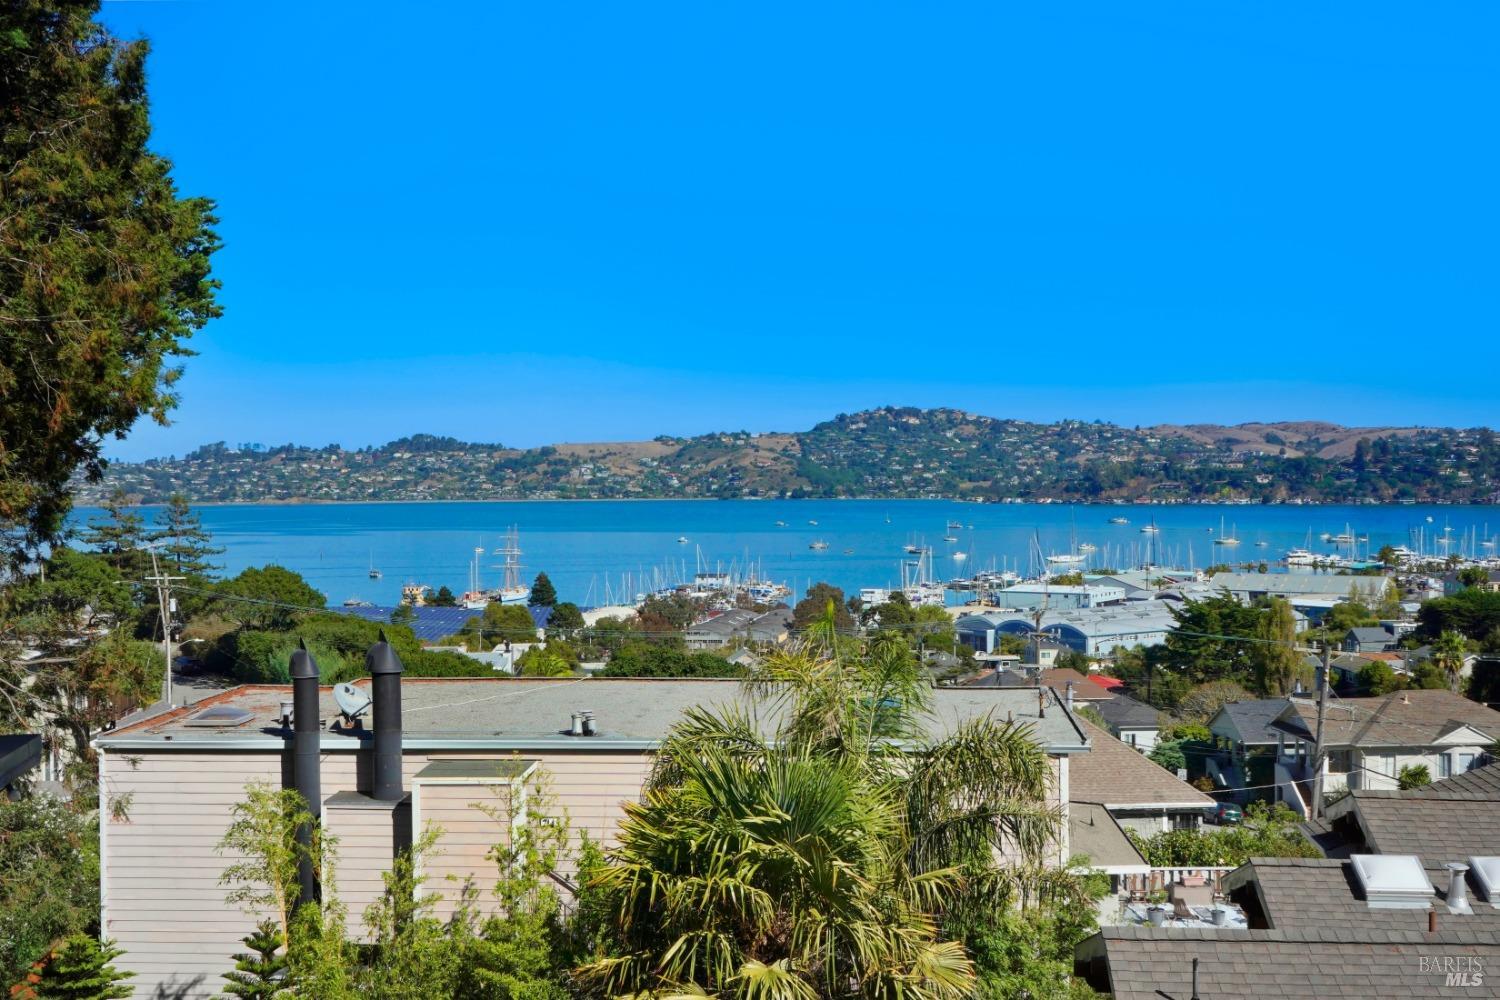 Amazing investment fixer opp with exceptional views of the Sausalito Bay! Two homes with 3 units on the same lot. Sitting on a quiet dead end corner of Spring and Gordon streets in Woodward Valley. 720 Spring Street is a '40s era 2bd 1bth summer cottage about 725 sqft, has views of the Bay from the livingroom and porch, a large back deck with an enclosed washer dryer, can be expanded to ADU 1000 sqft, and the tenants pay $3,500. 8 Gordon is a '60s era 2-story house that was made into a duplex: 8A is the vacant upstairs 2bd 1.5bth with a beautiful expansive view and separate garage that rented for $4,400. This prime unit could be updated and expanded to create a large master suite. 8B is the lower and large 1bd unit that has been freshly remodeled and rented for $1,500. Both two units have their own W/D but share utilities. The property has a lot of deferred maintenance including replacing the sewer laterals.